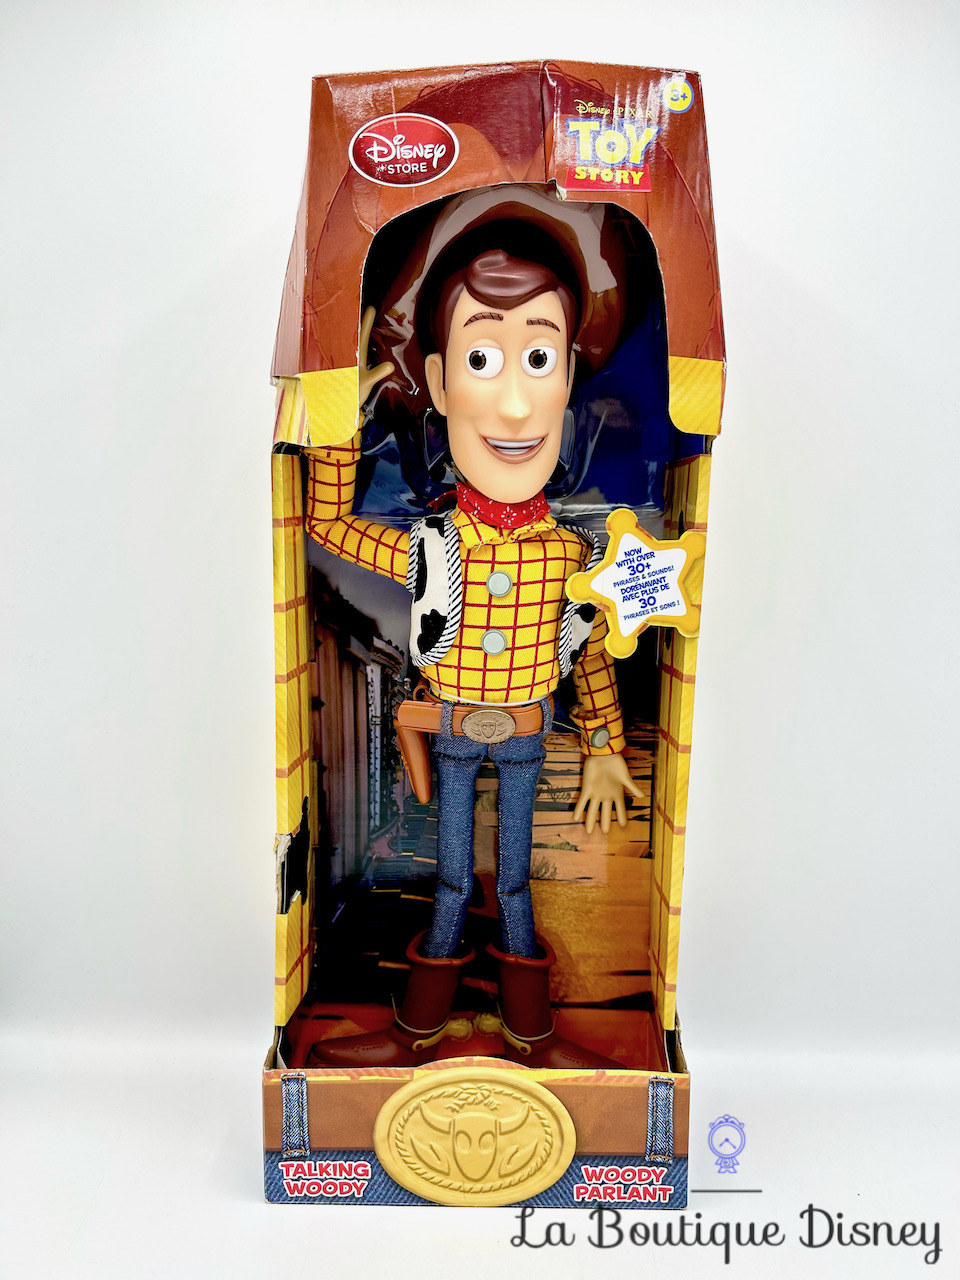 Poupée Woody parlant à ficelle Disney Store 2016 Toy Story figurine articulée Talking Woody